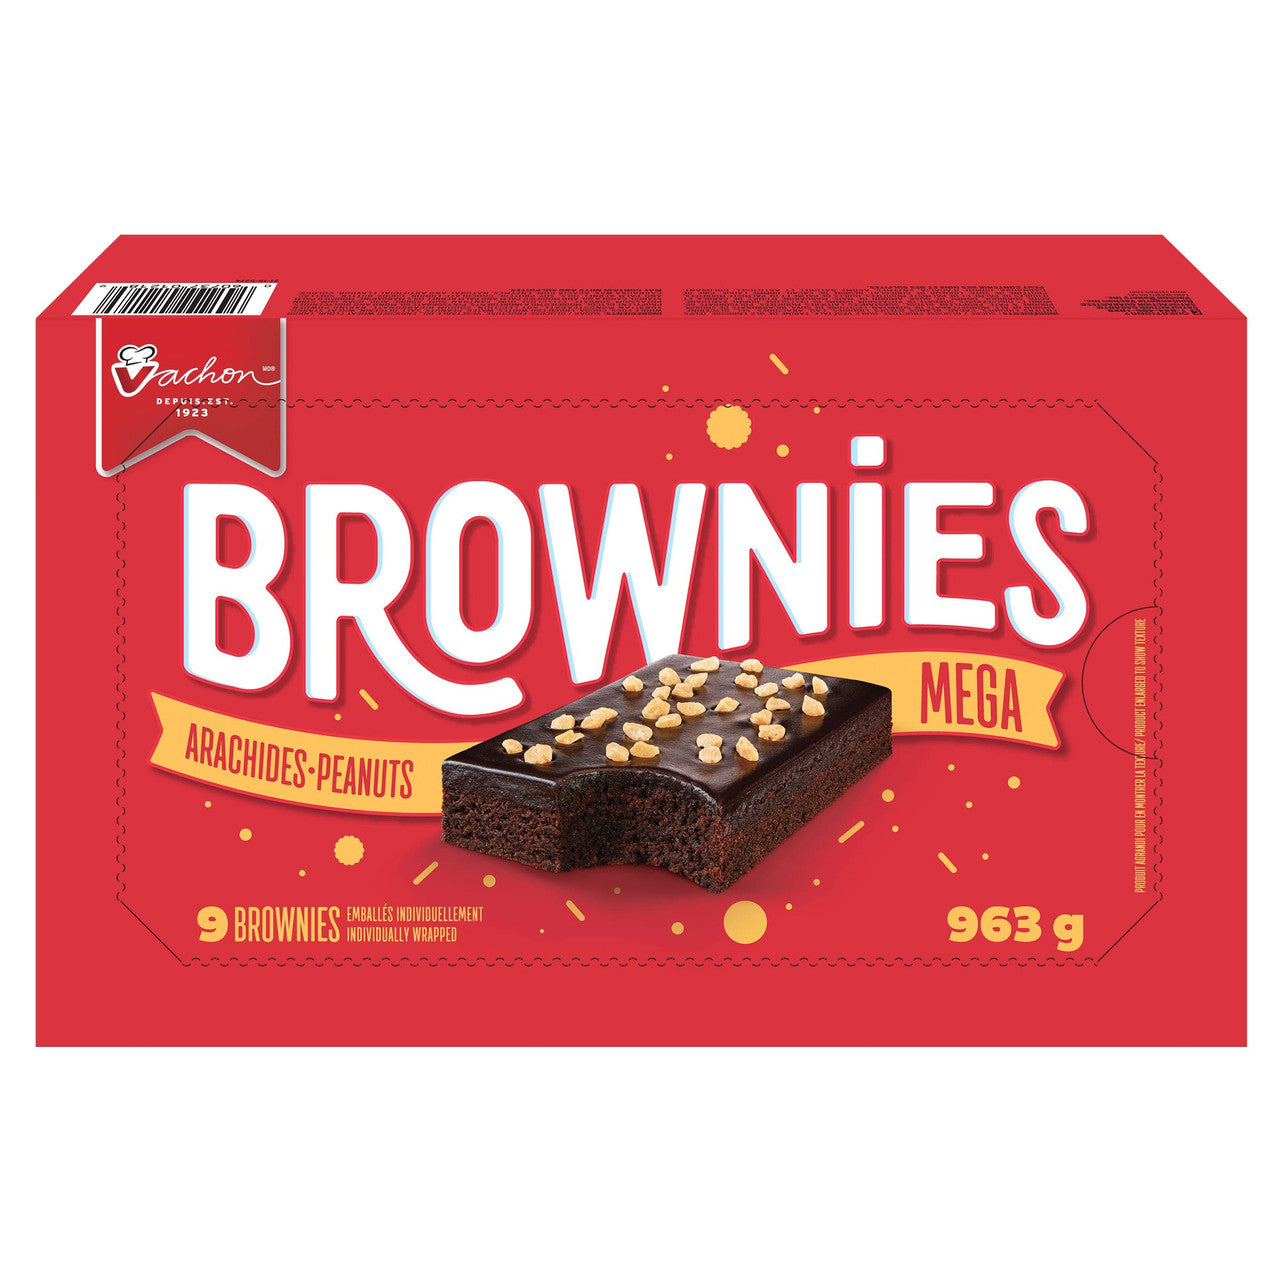 Vachon Mega Brownies with Peanuts and Decadent Chocolatey Frosting, Snack Food, Contains 9 brownies (Individually Wrapped) 963g/34 oz., {Imported from Canada}